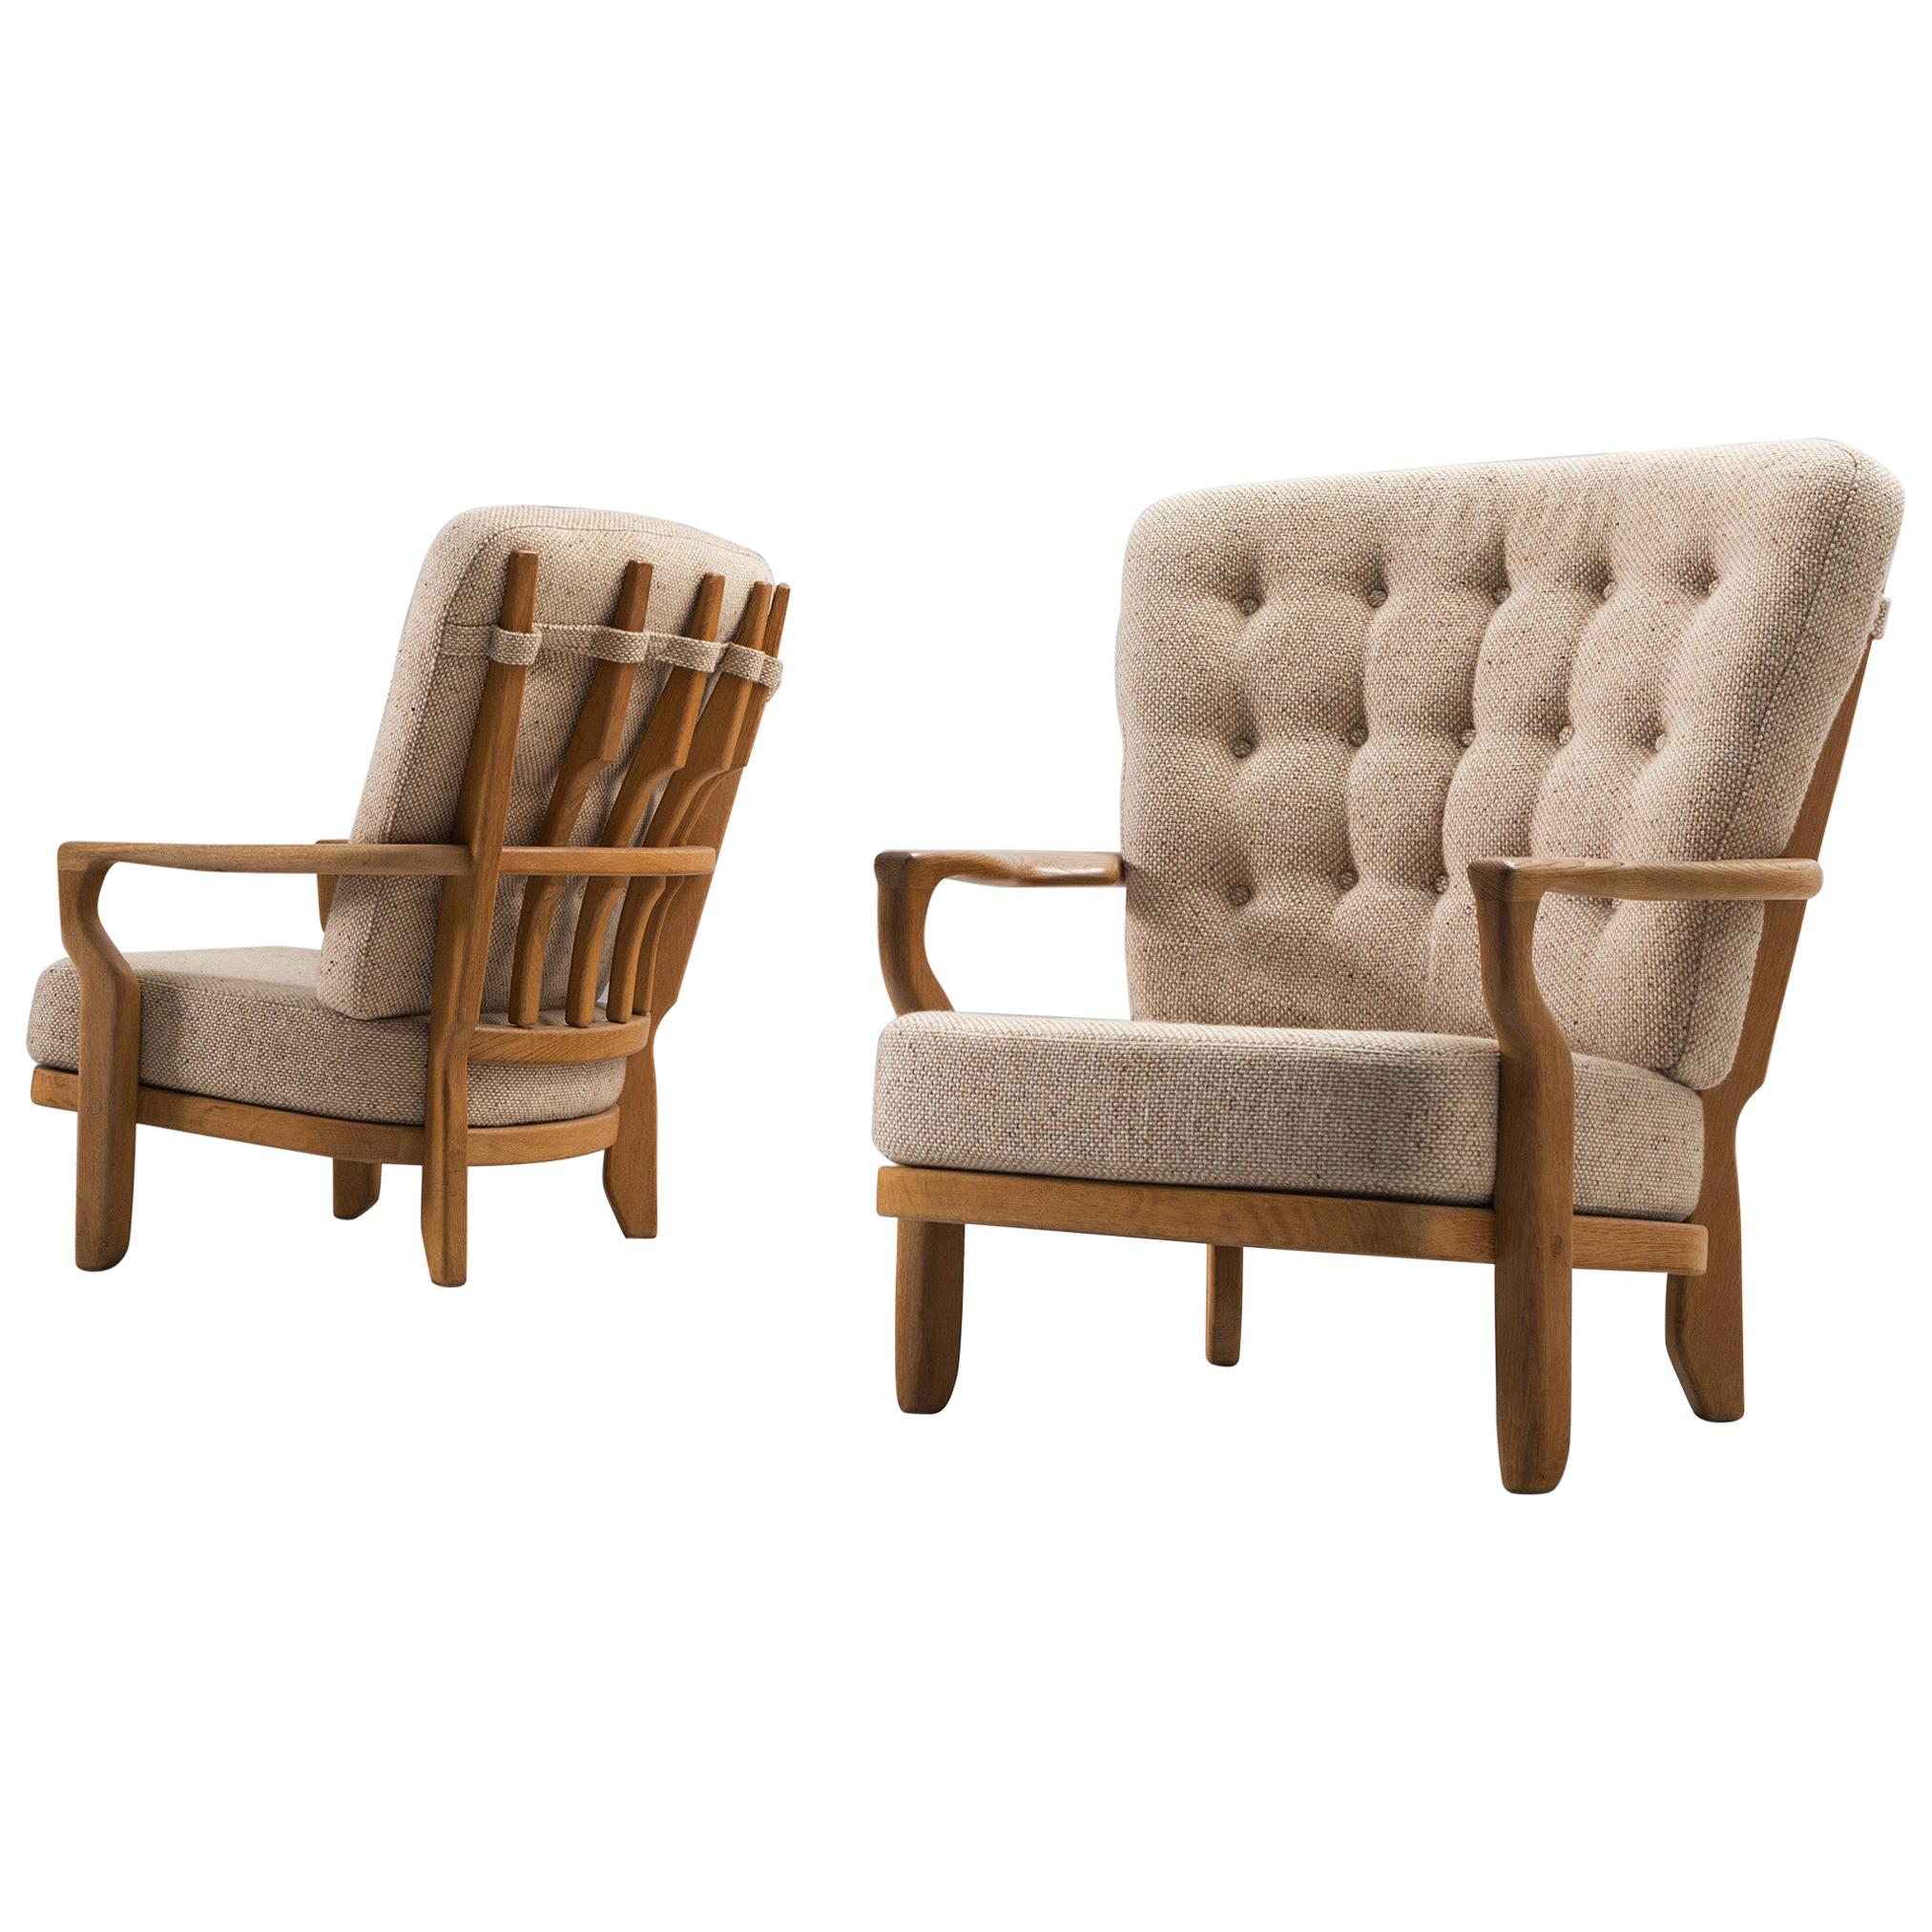 Guillerme & Chambron Lounge Chair in Solid Oak